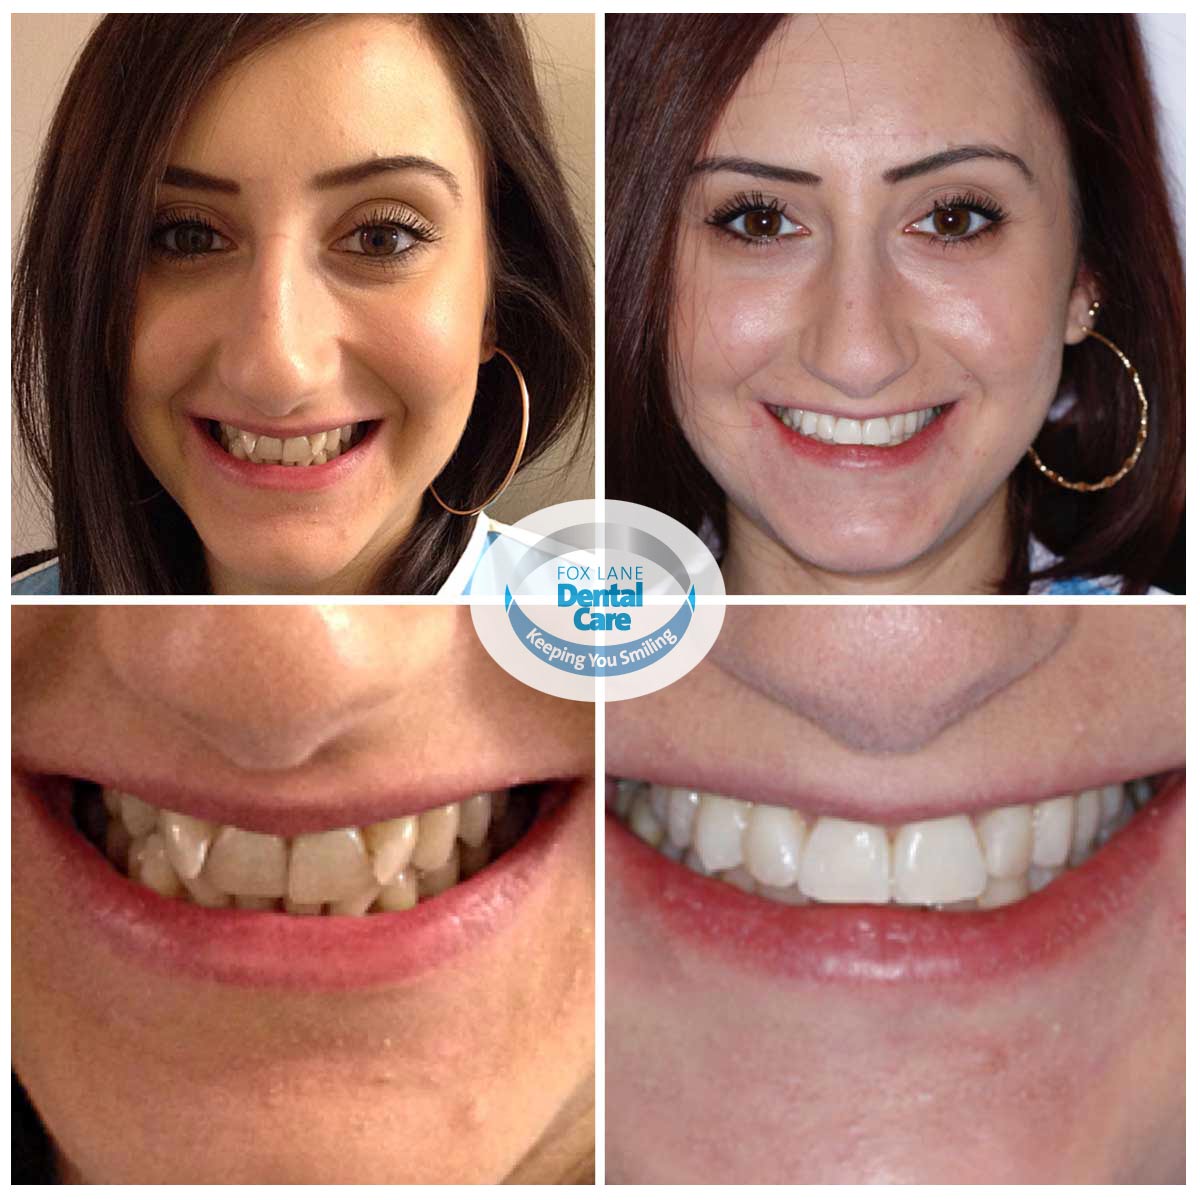 4-before-after-orthodontics-smile-makeovers - Fox Lane ...